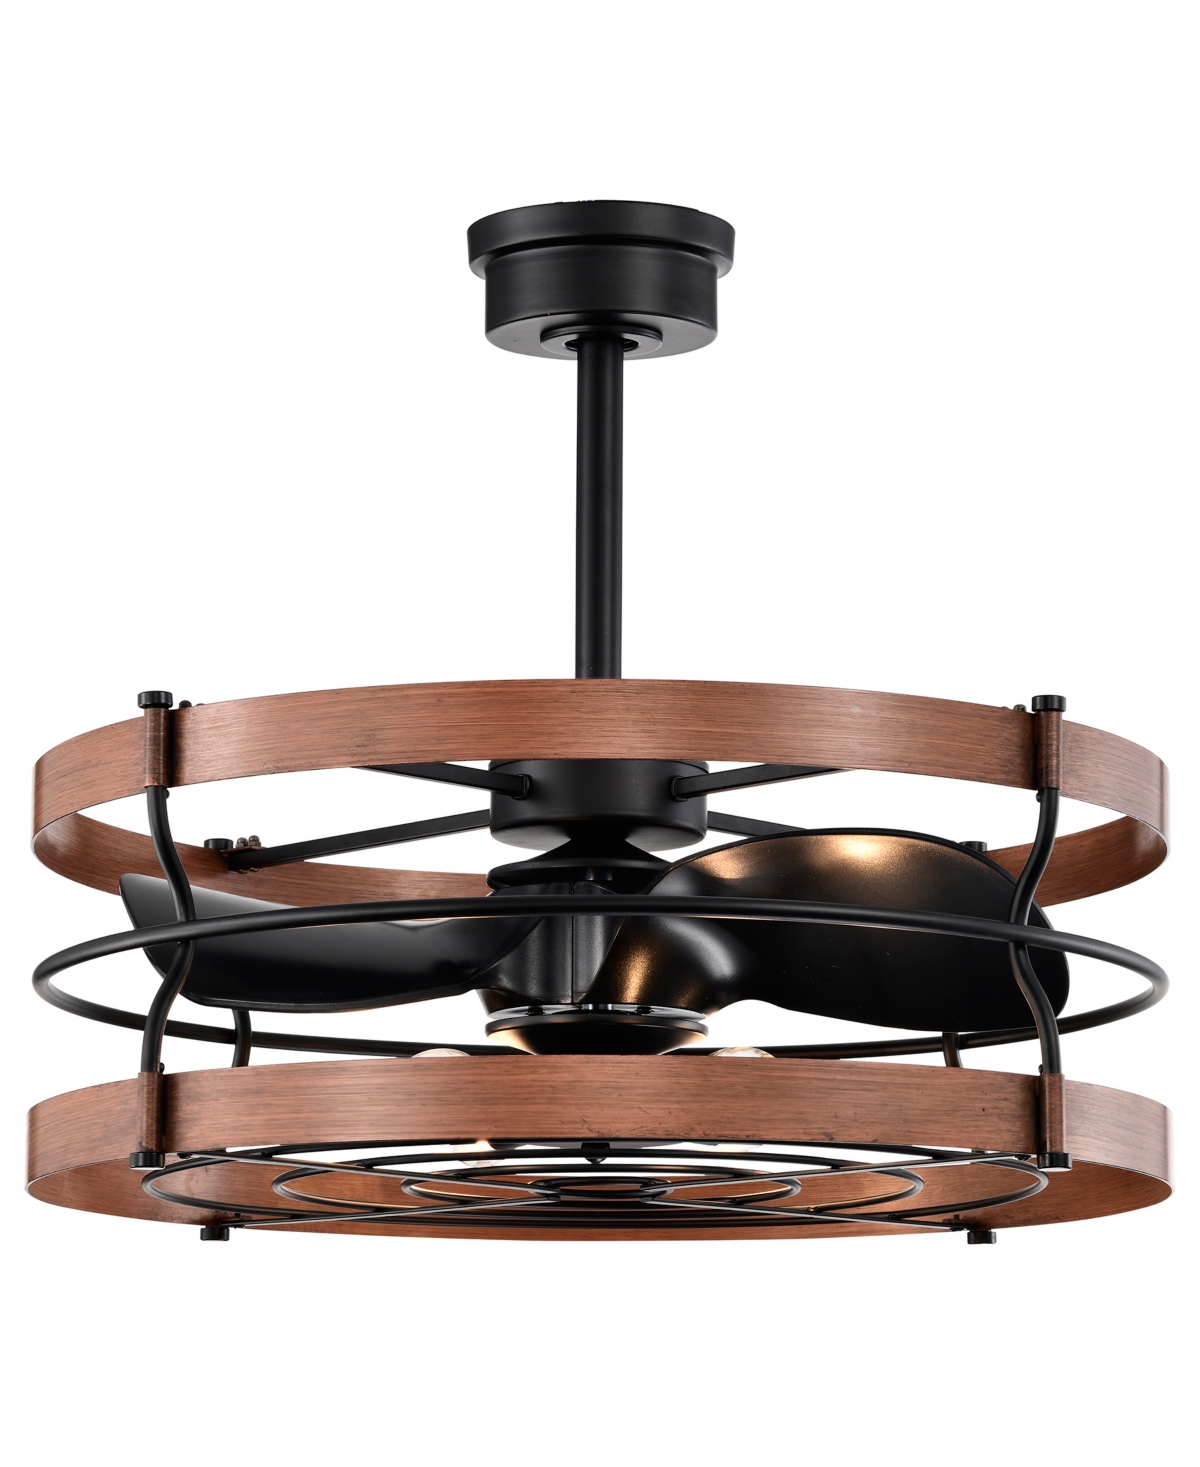 Home Accessories Isla 26" 6-light Indoor Finish Ceiling Fan With Light Kit In Matte Black And Brown Faux Wood Grain